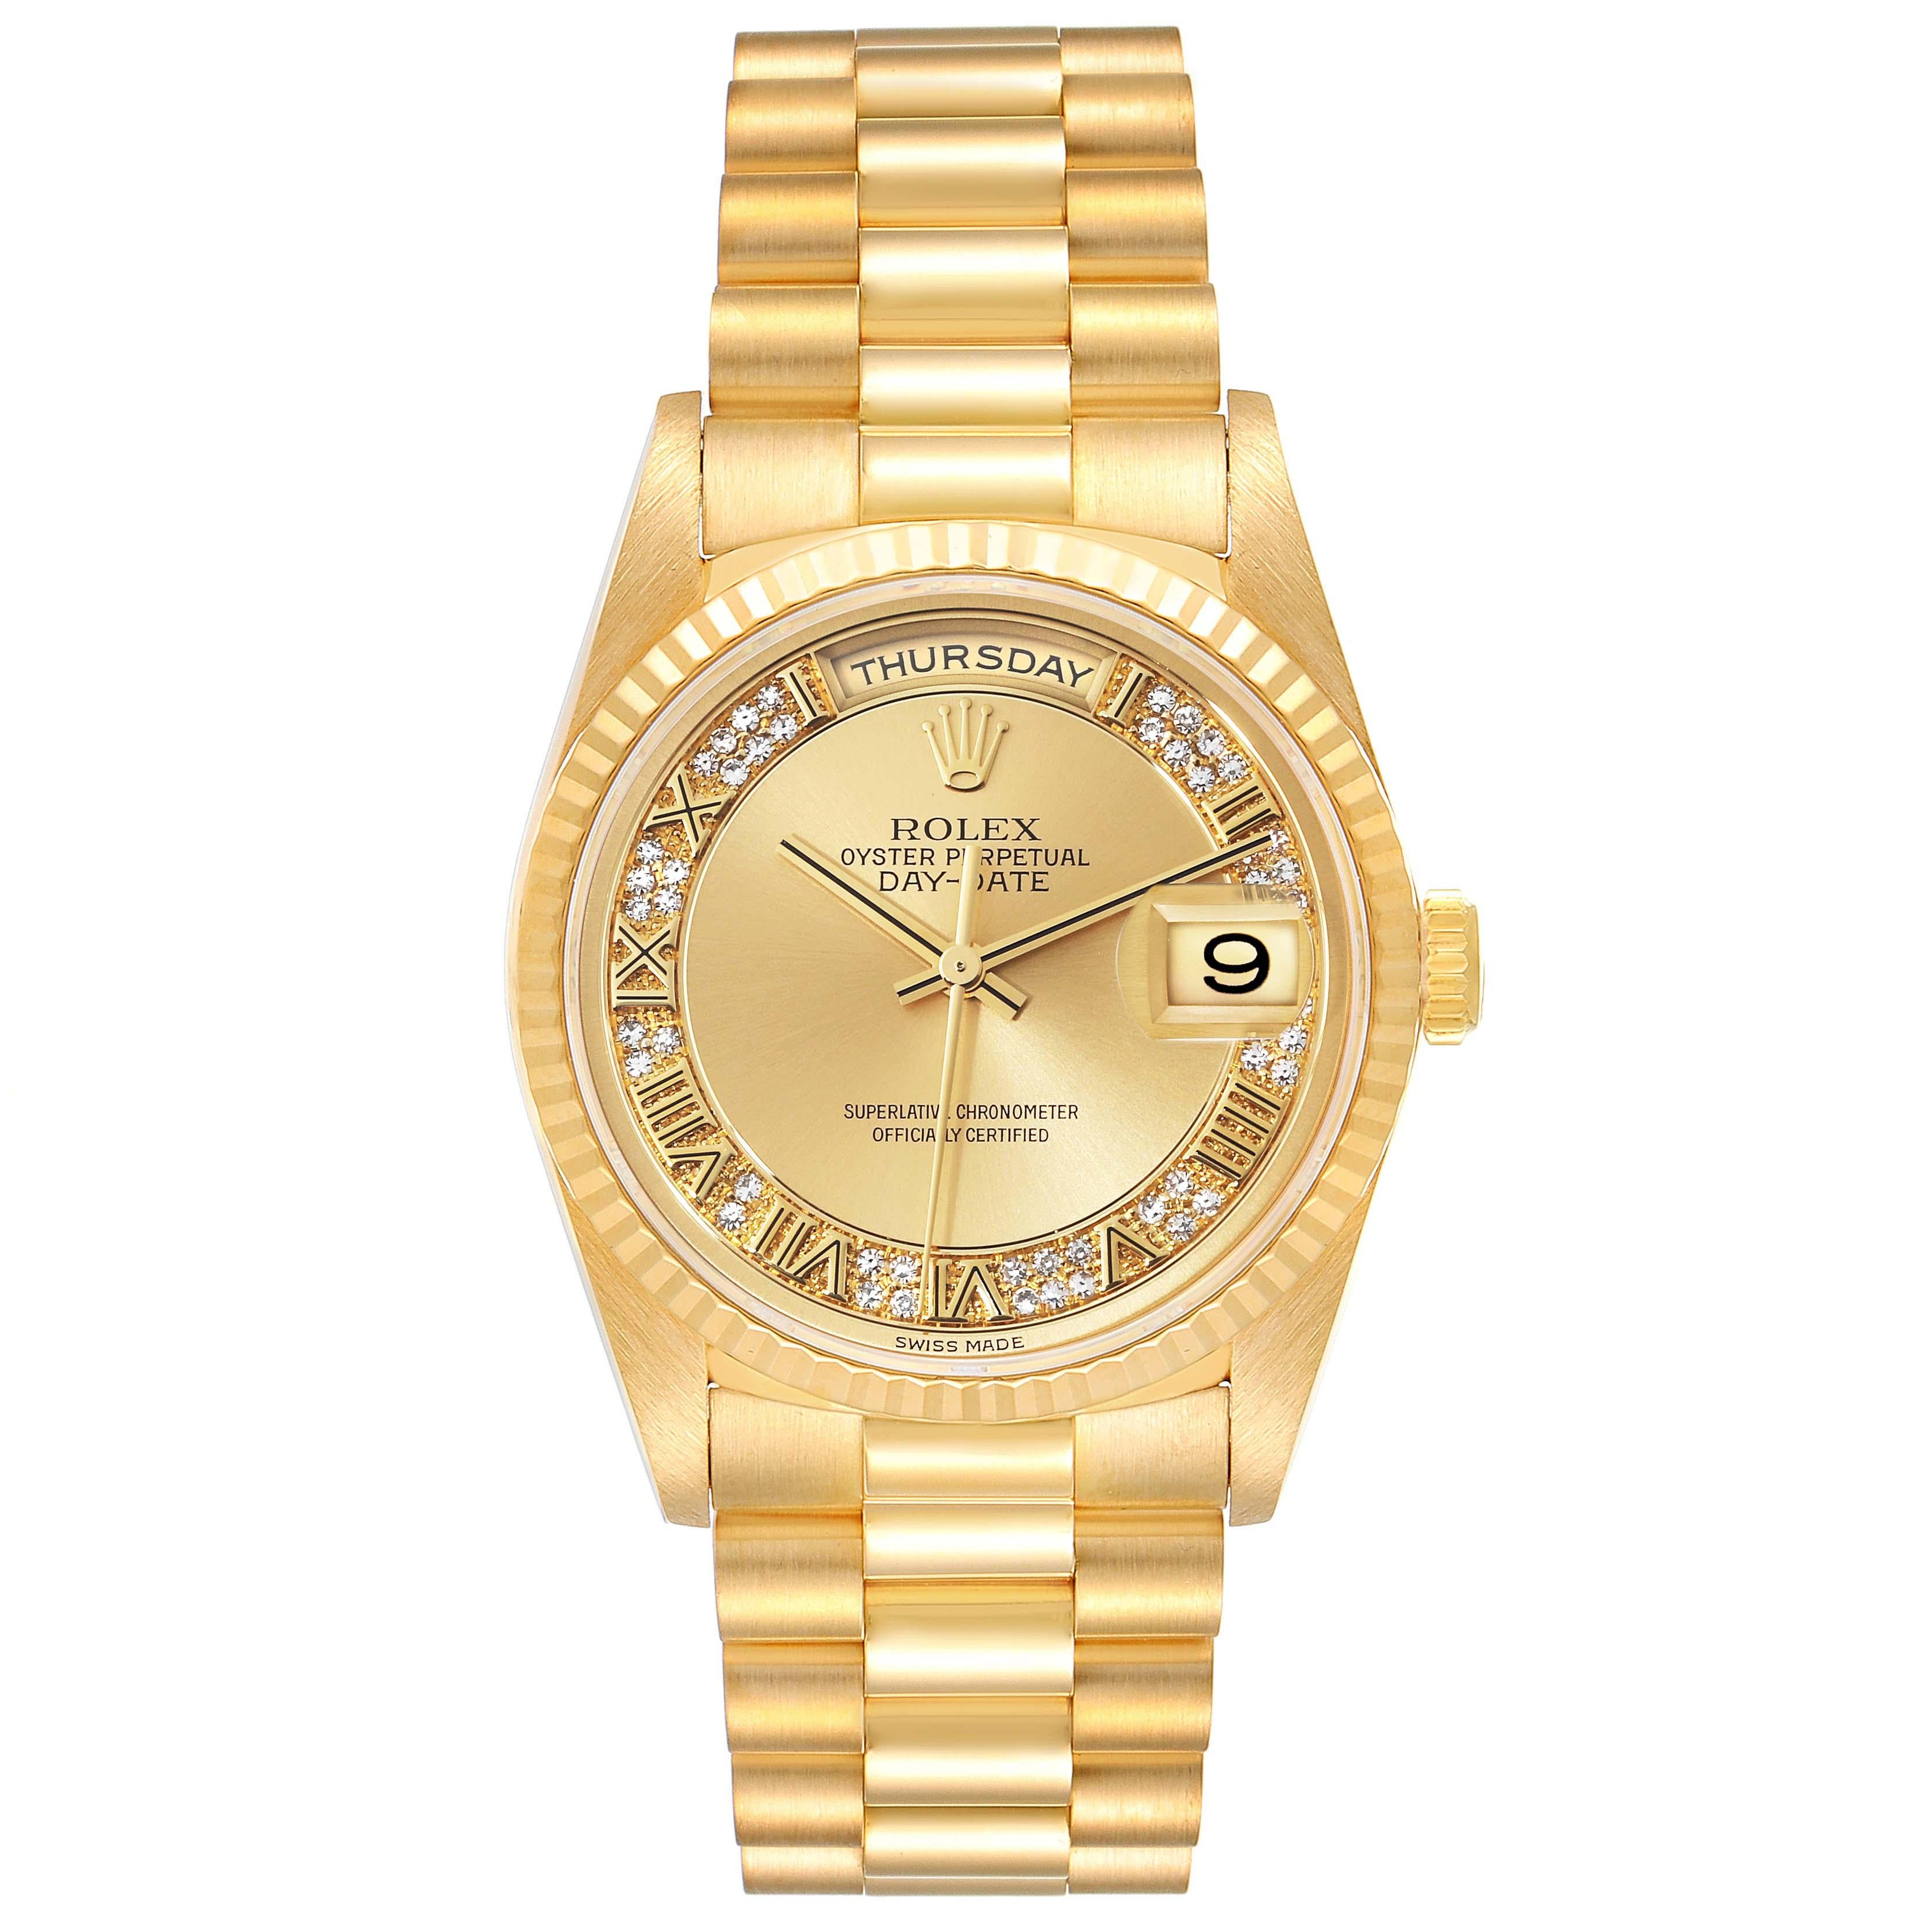 Rolex President Day-Date Yellow Gold Myriad Diamond Mens Watch 18238. Officially certified chronometer automatic self-winding movement. 18k yellow gold oyster case 36.0 mm in diameter. Rolex logo on a crown. 18k yellow gold fluted bezel. Scratch